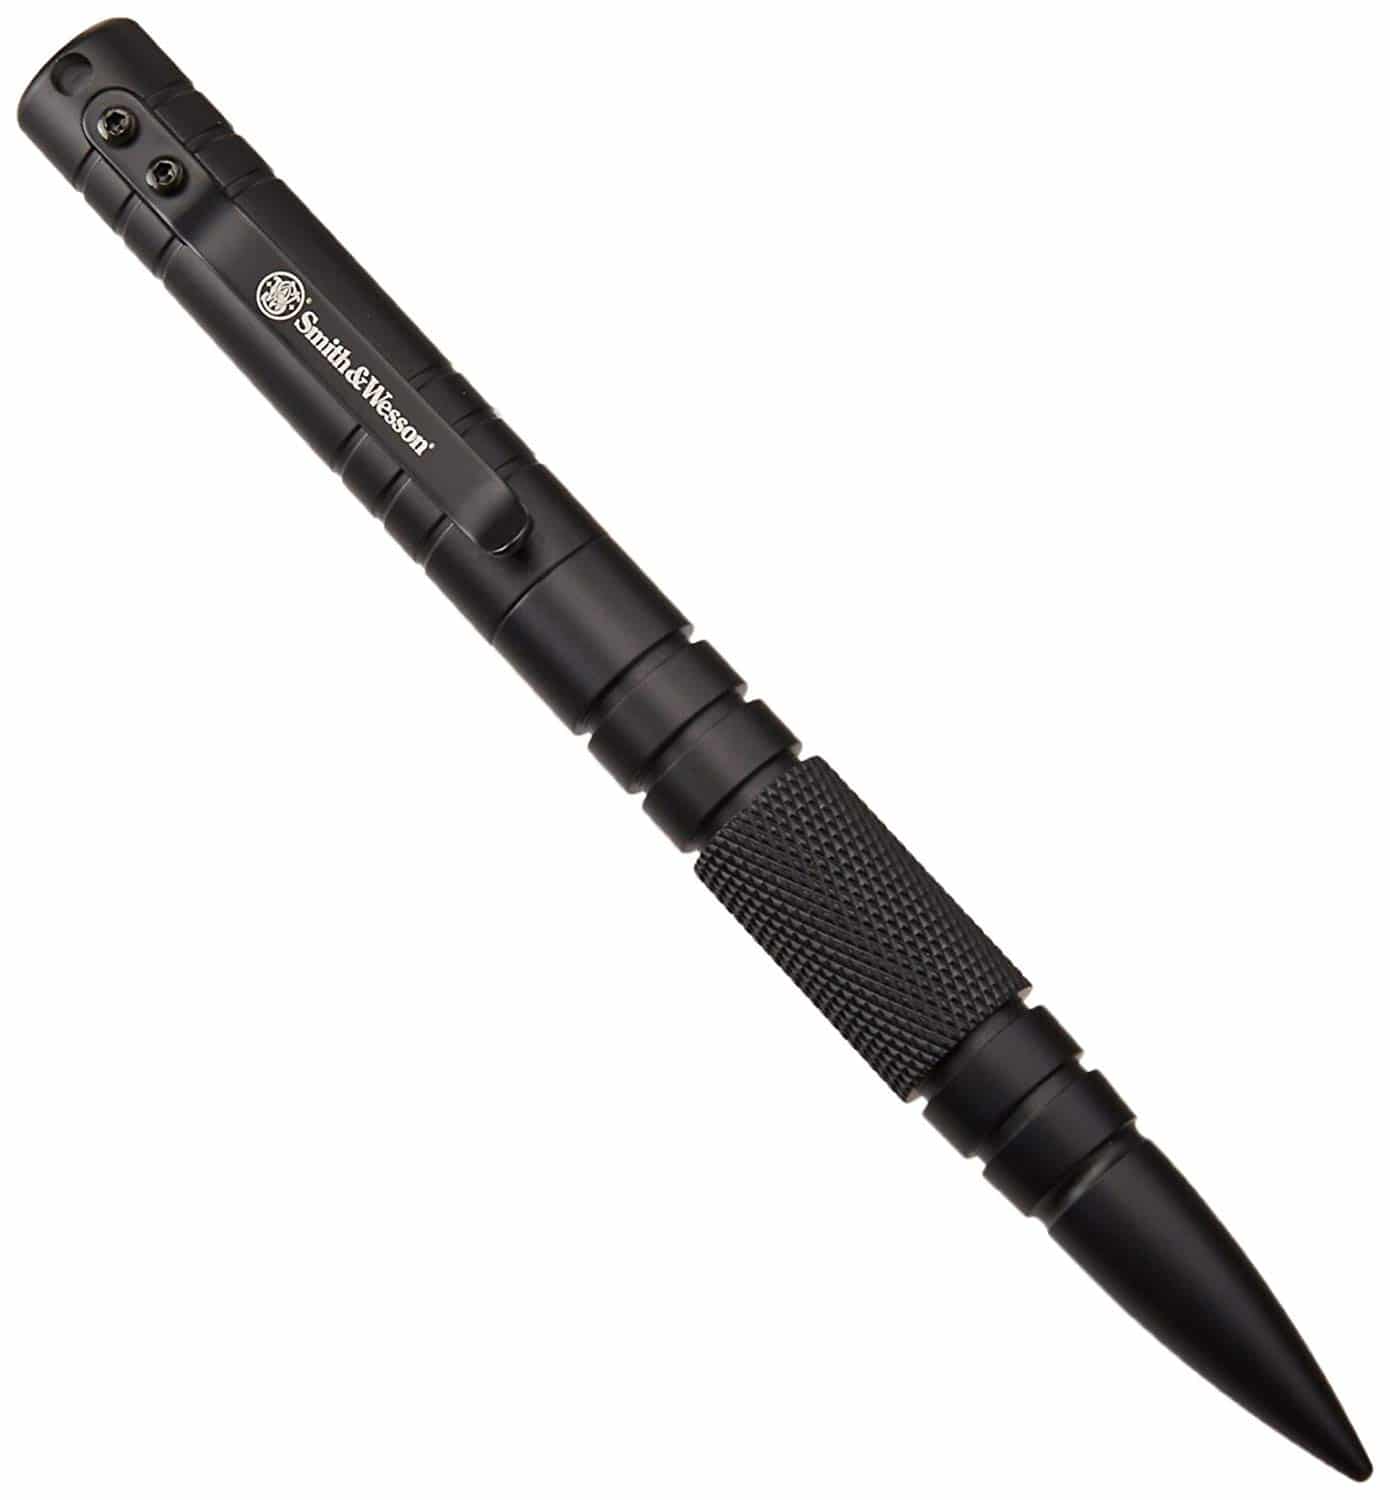 Smith & Wesson 6.1in Aircraft Aluminum Refillable Tactical Pull Cap Pen